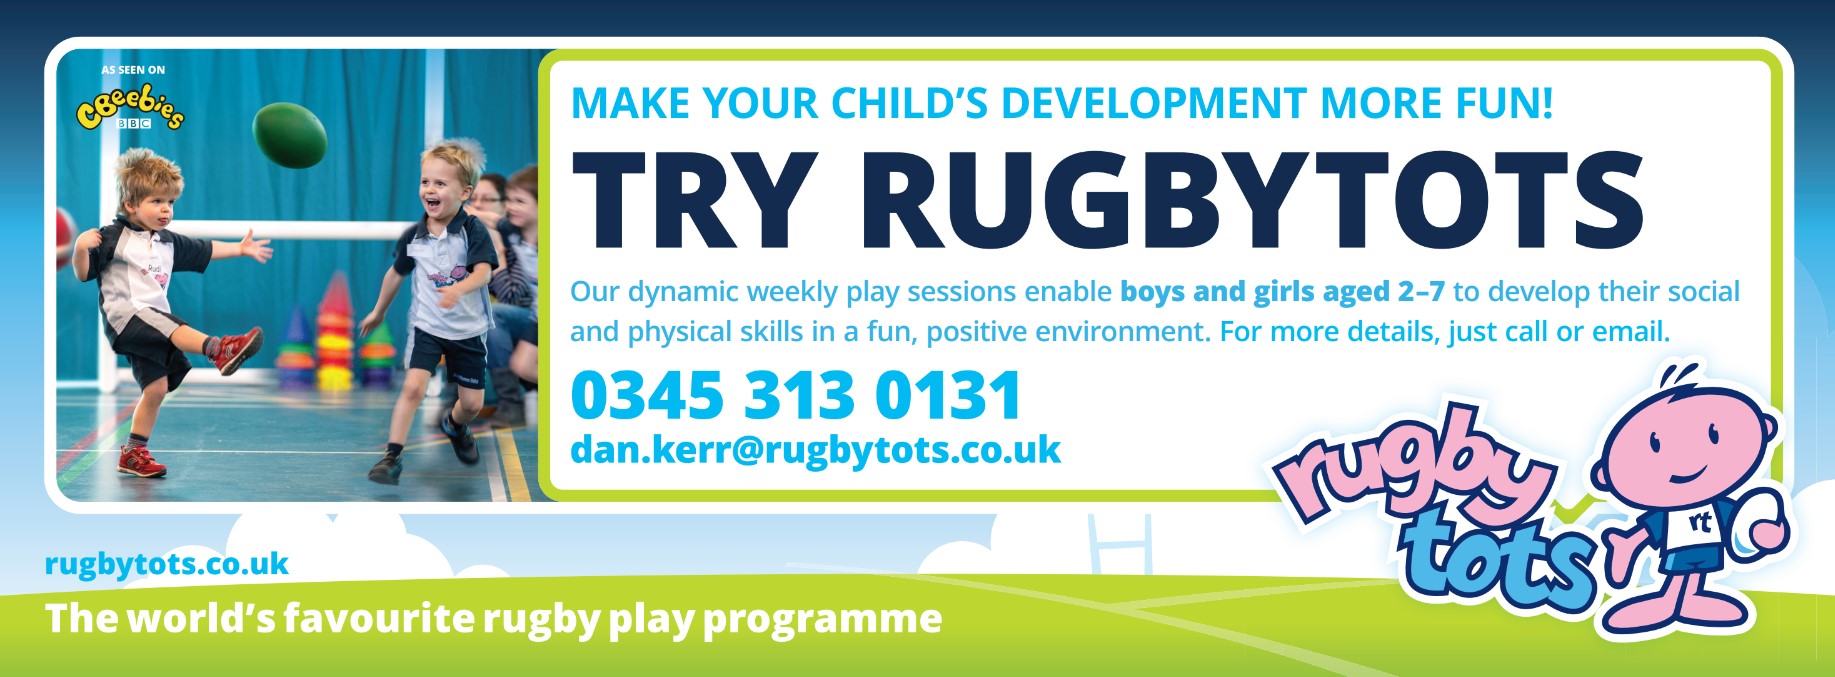 Rugbytots's main image